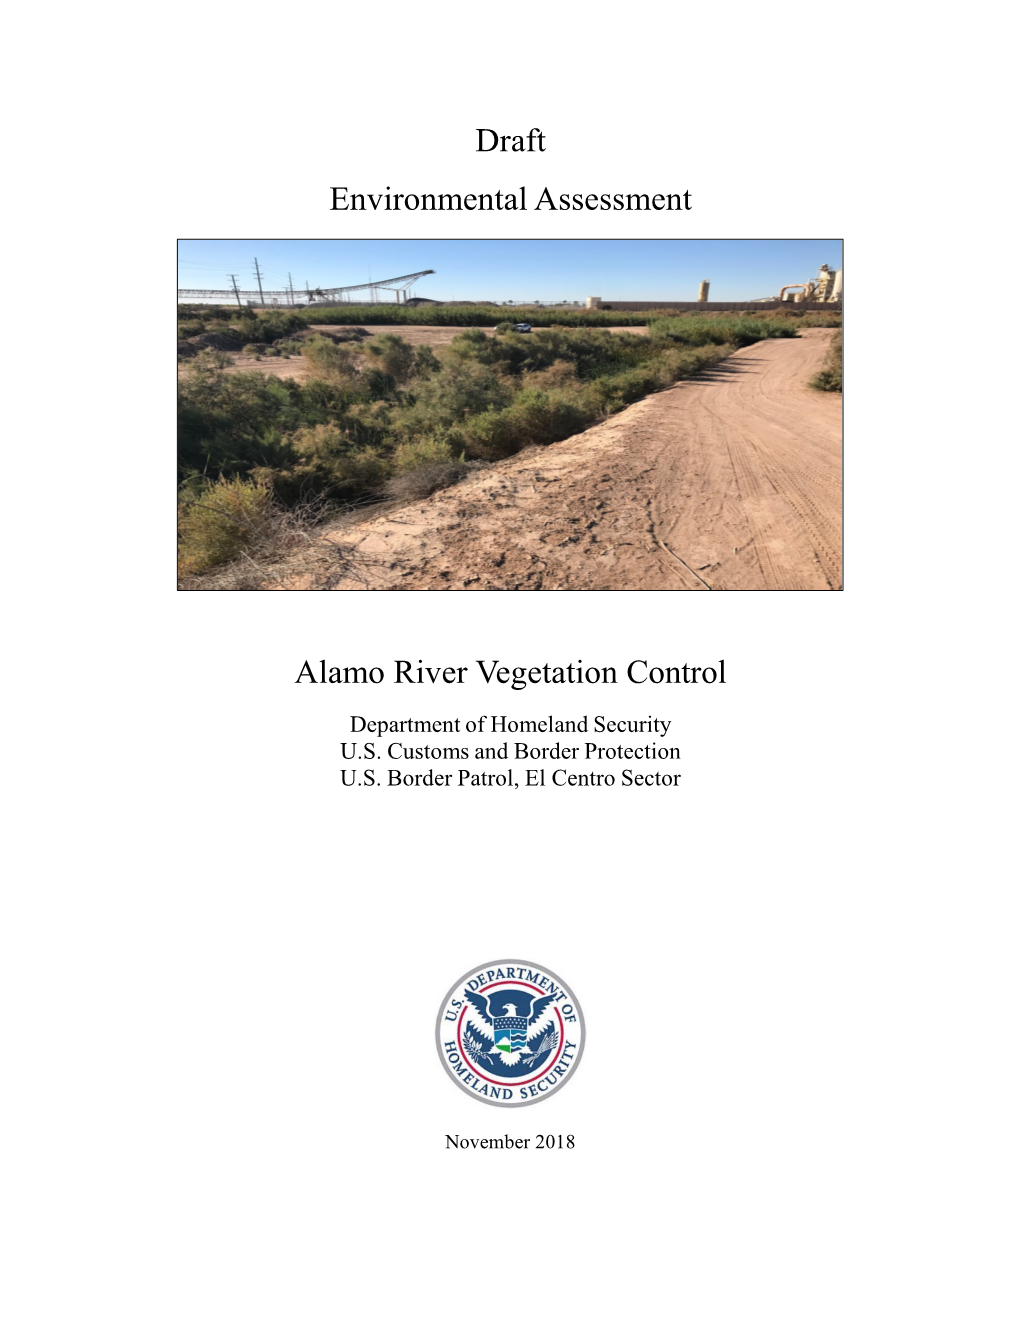 Draft Environmental Assessment for the Proposed Alamo River